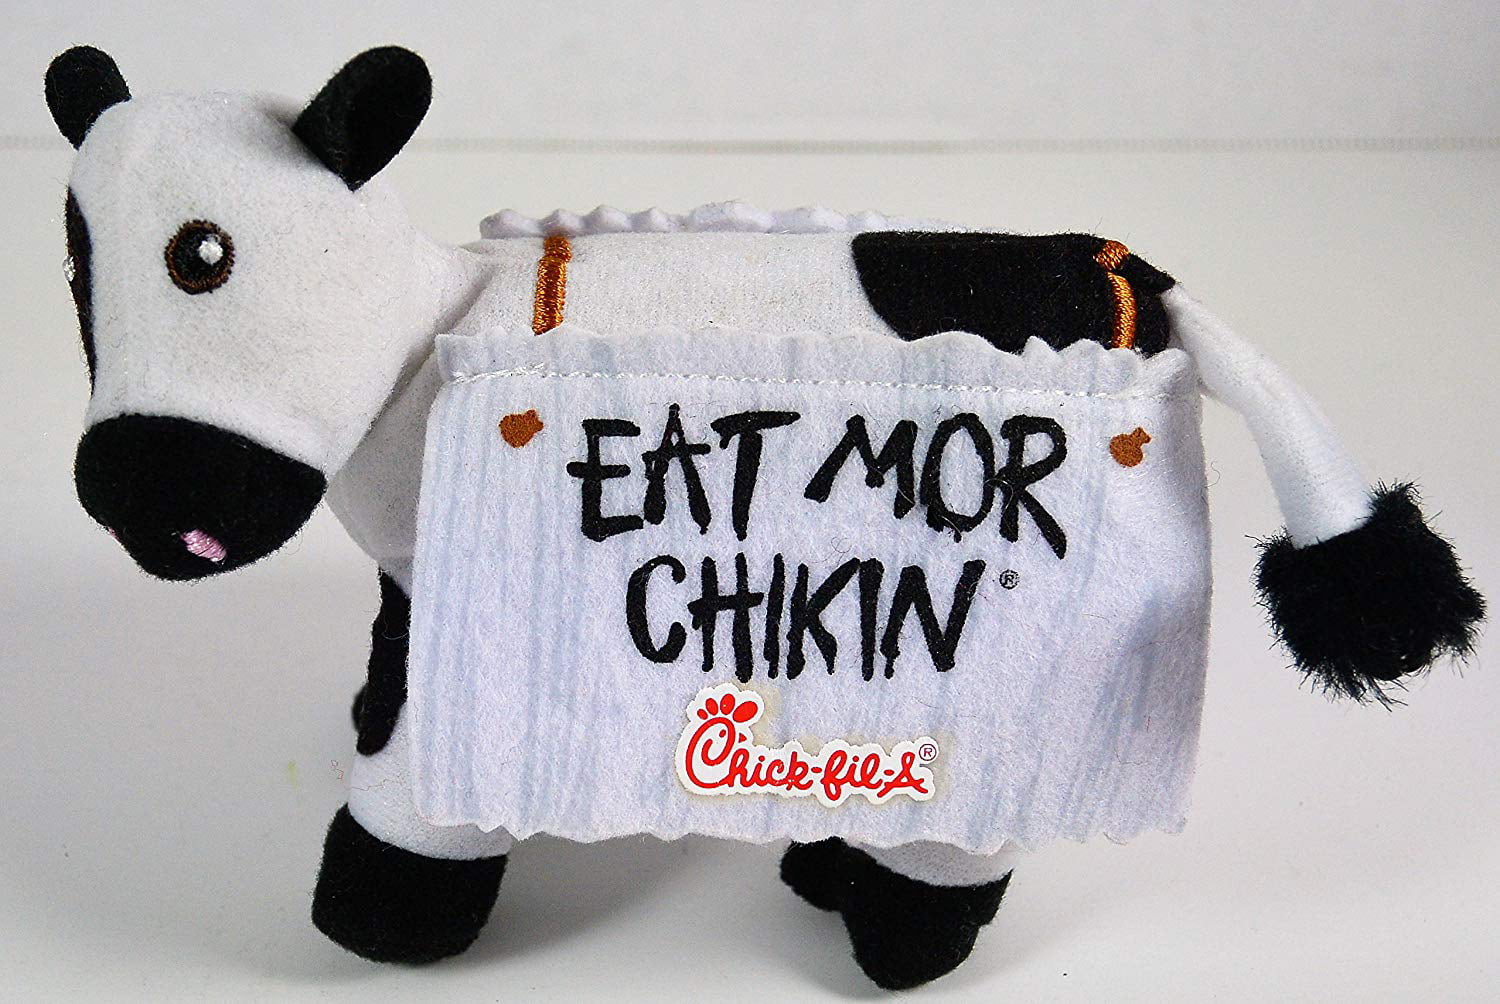 Lot of 2 Chick-fil-A Cow Plush Stuffed Animal Toy Eat Mor Chikin Promotional 